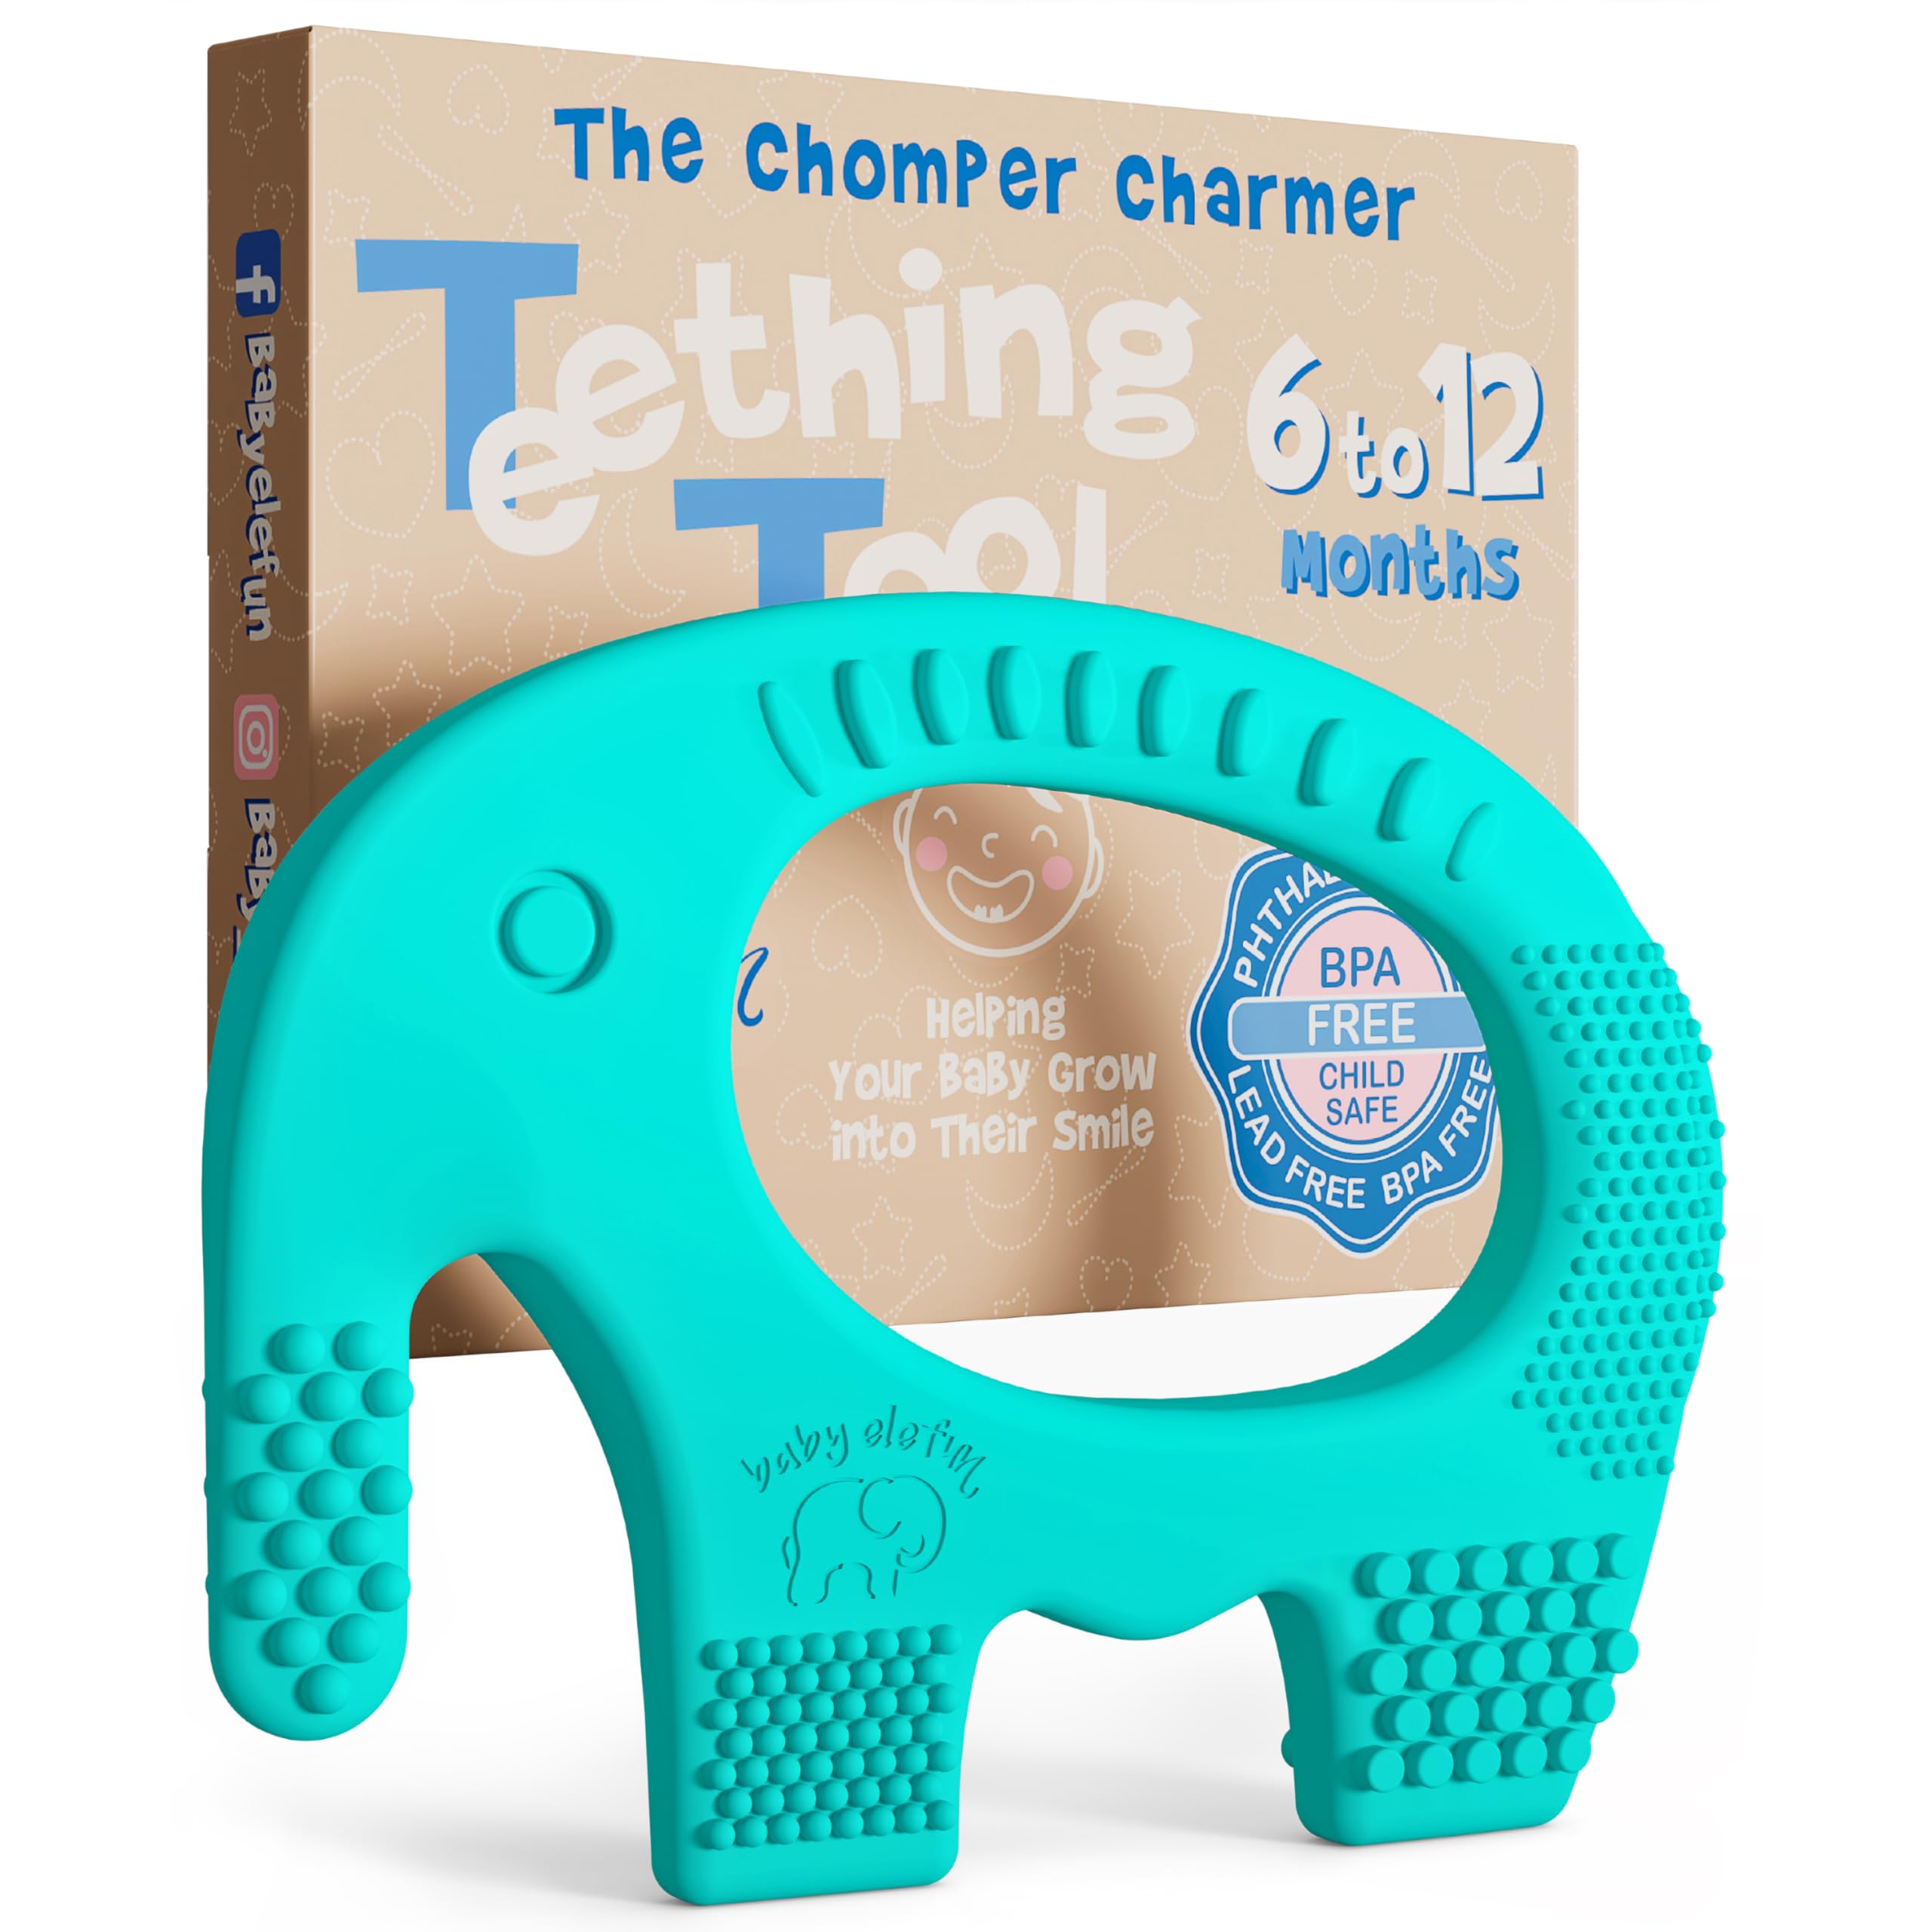 baby elefun Teething Toy Babies 6-12 Months - Baby Elefun 5X Pain Relief Toddler Teether - No More Ouch for Mom Anti Bite Trainer Nurtures G